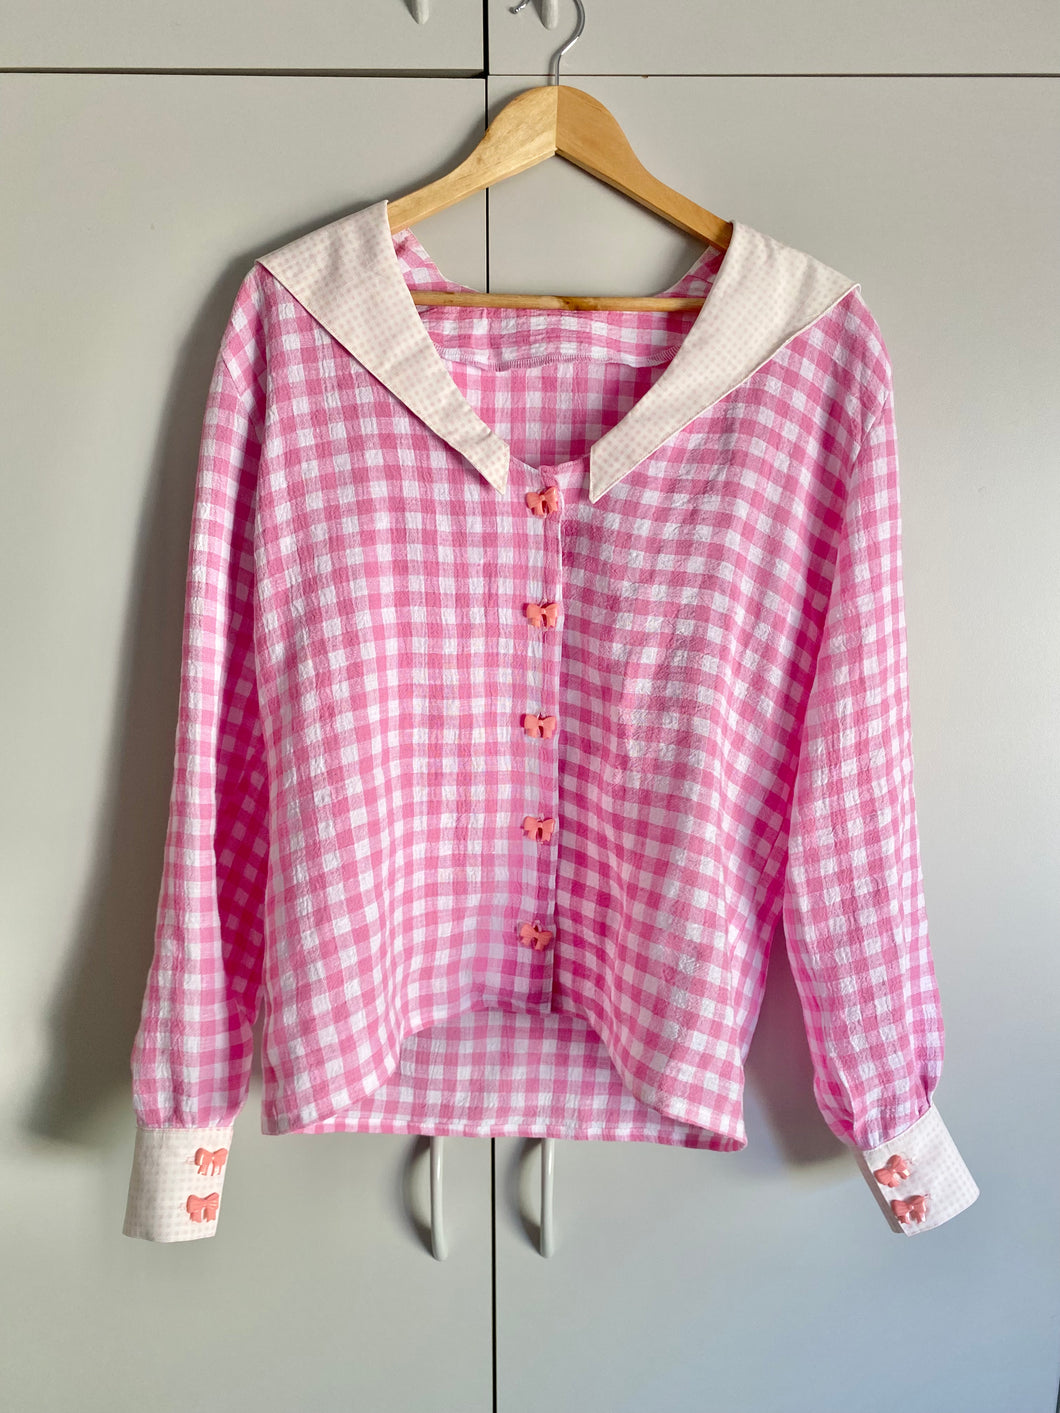 Usagi Blouse in Pink Gingham - S Size Sample